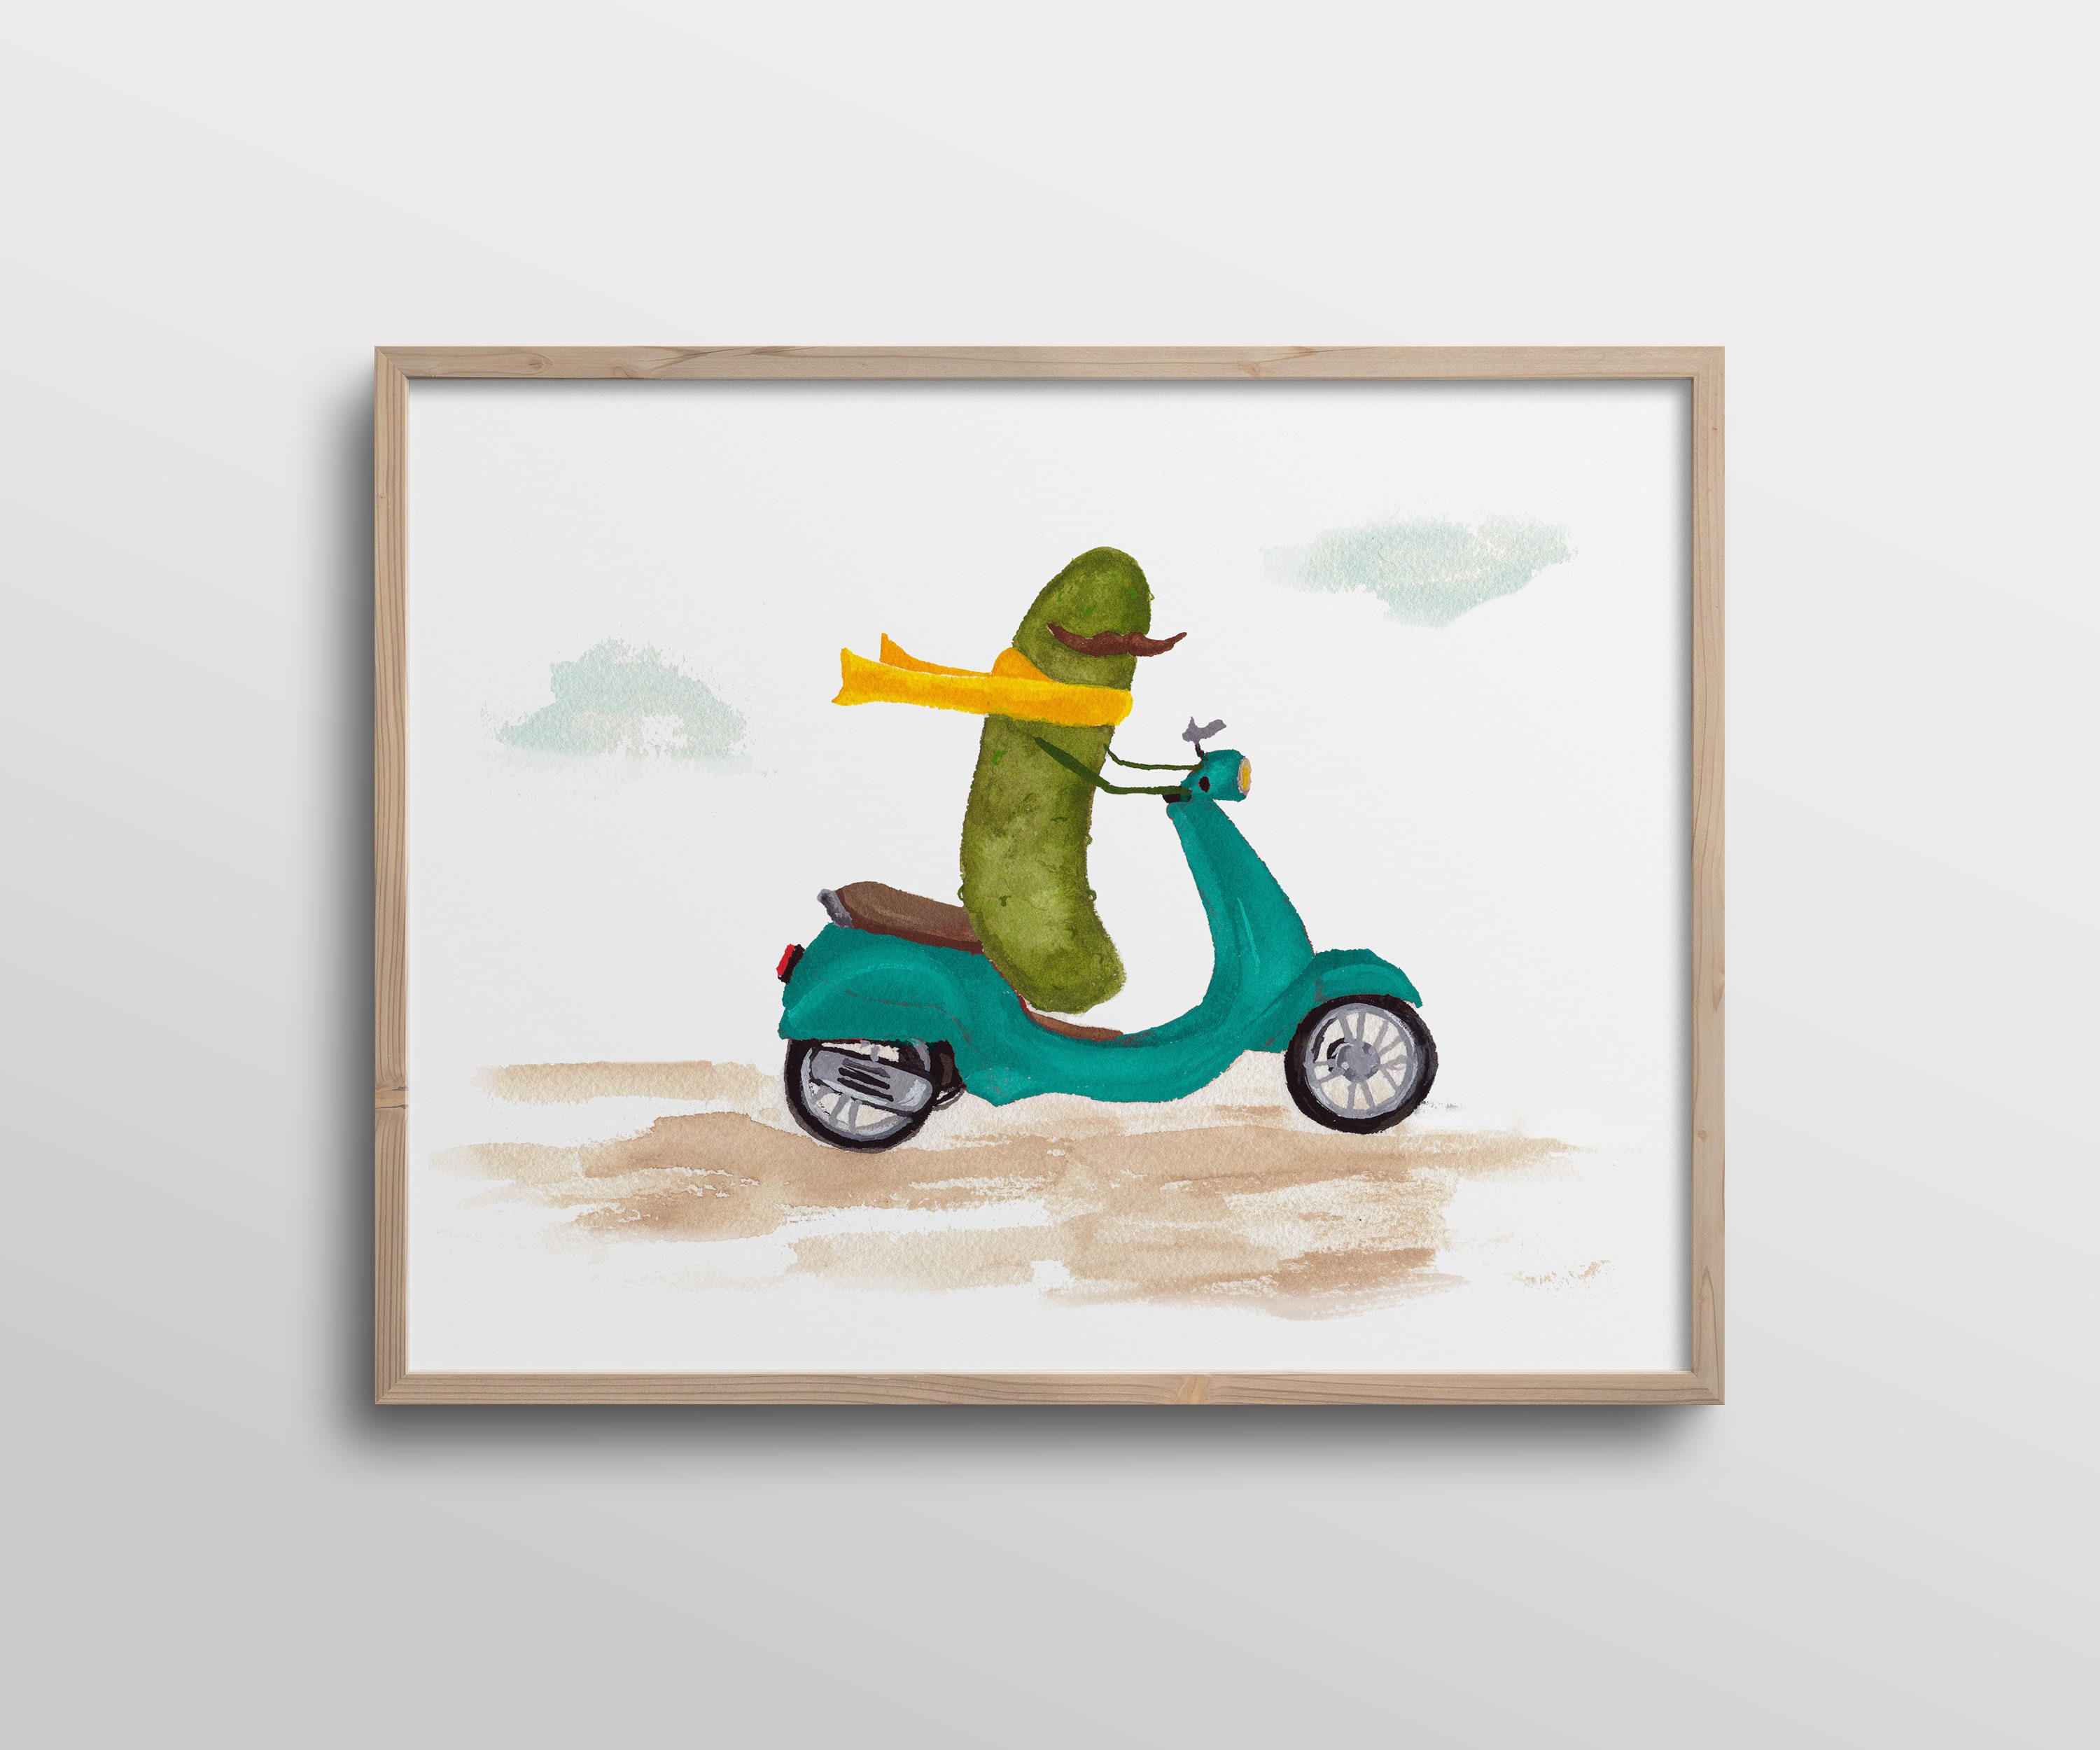 Is a Vespa the best way to return to the workplace?